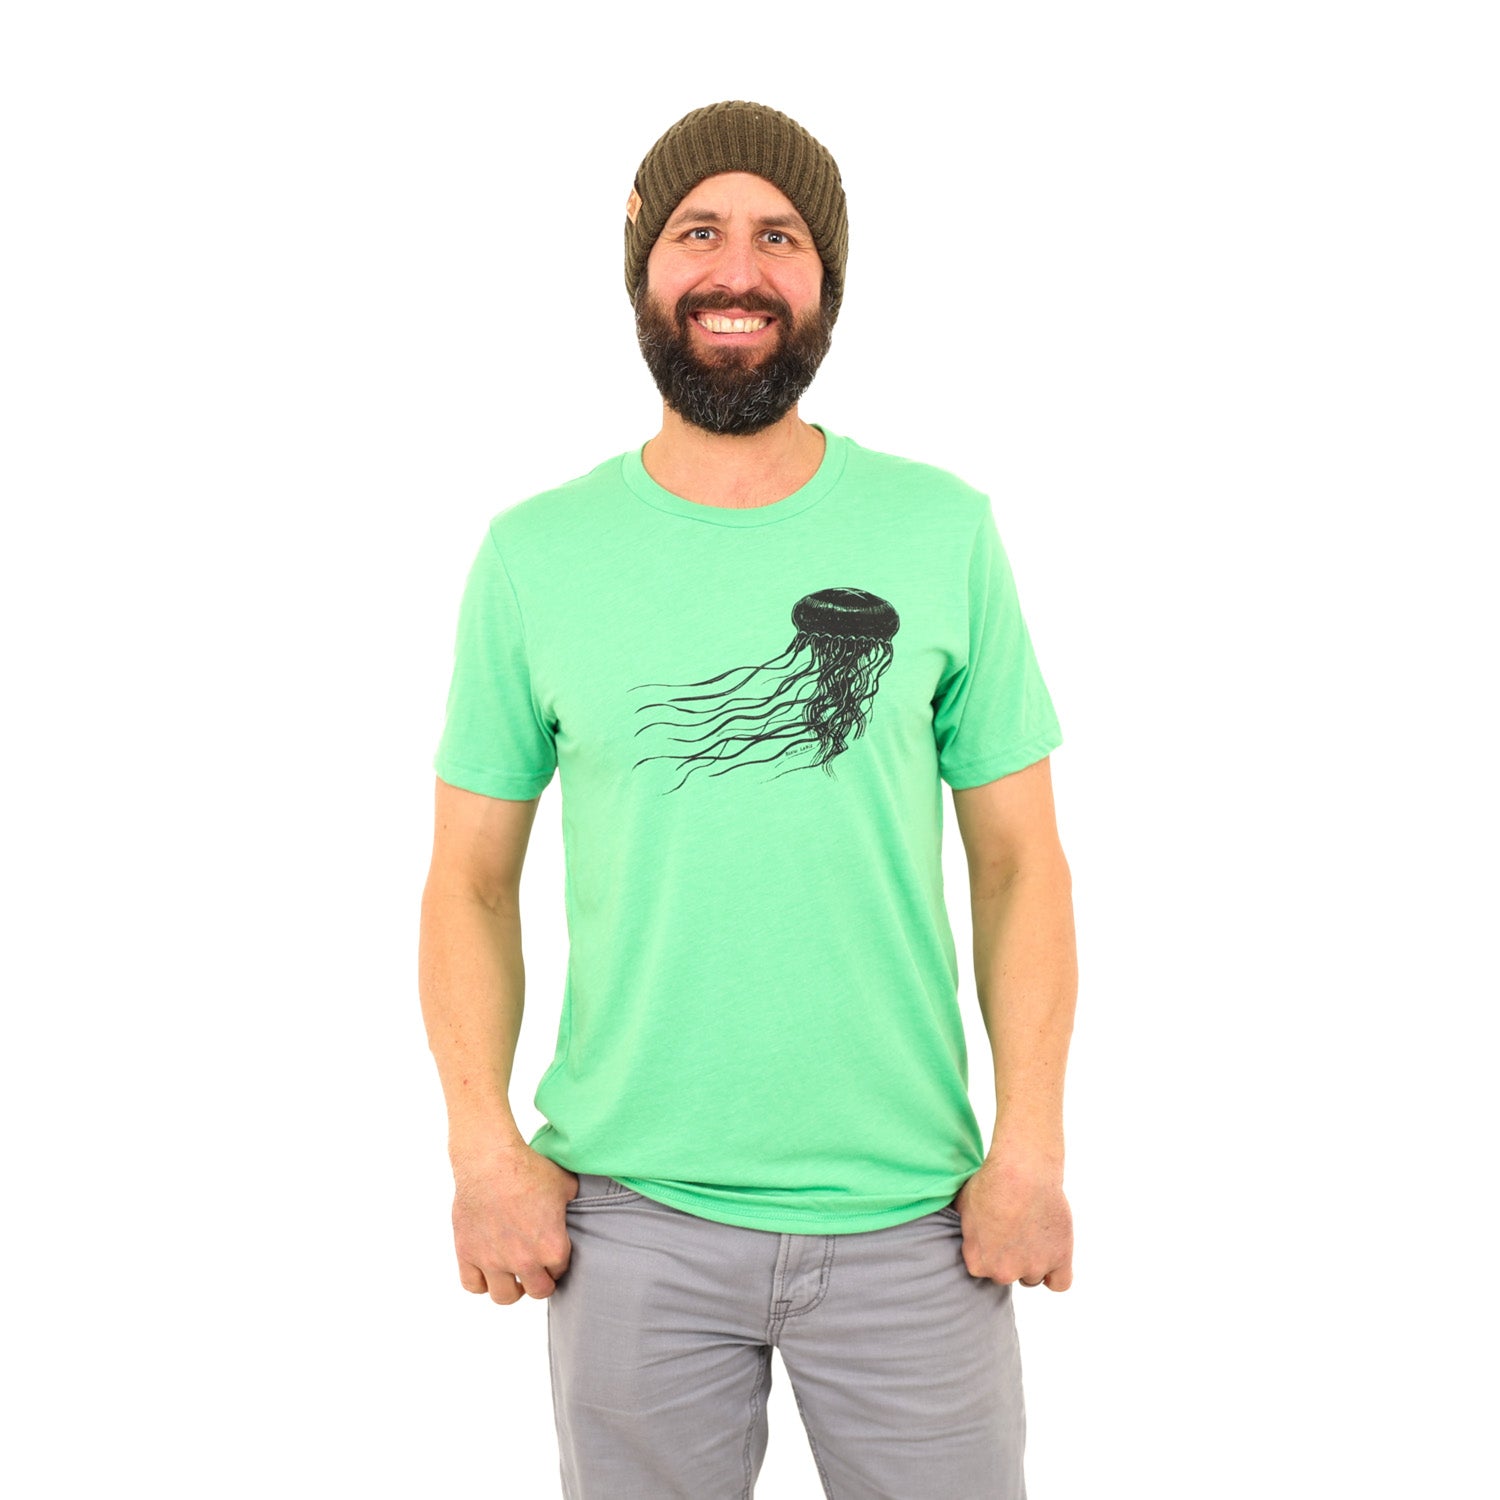 Man with beard and beanie wearing a bright green t-shirt with a black jellyfish print across the chest